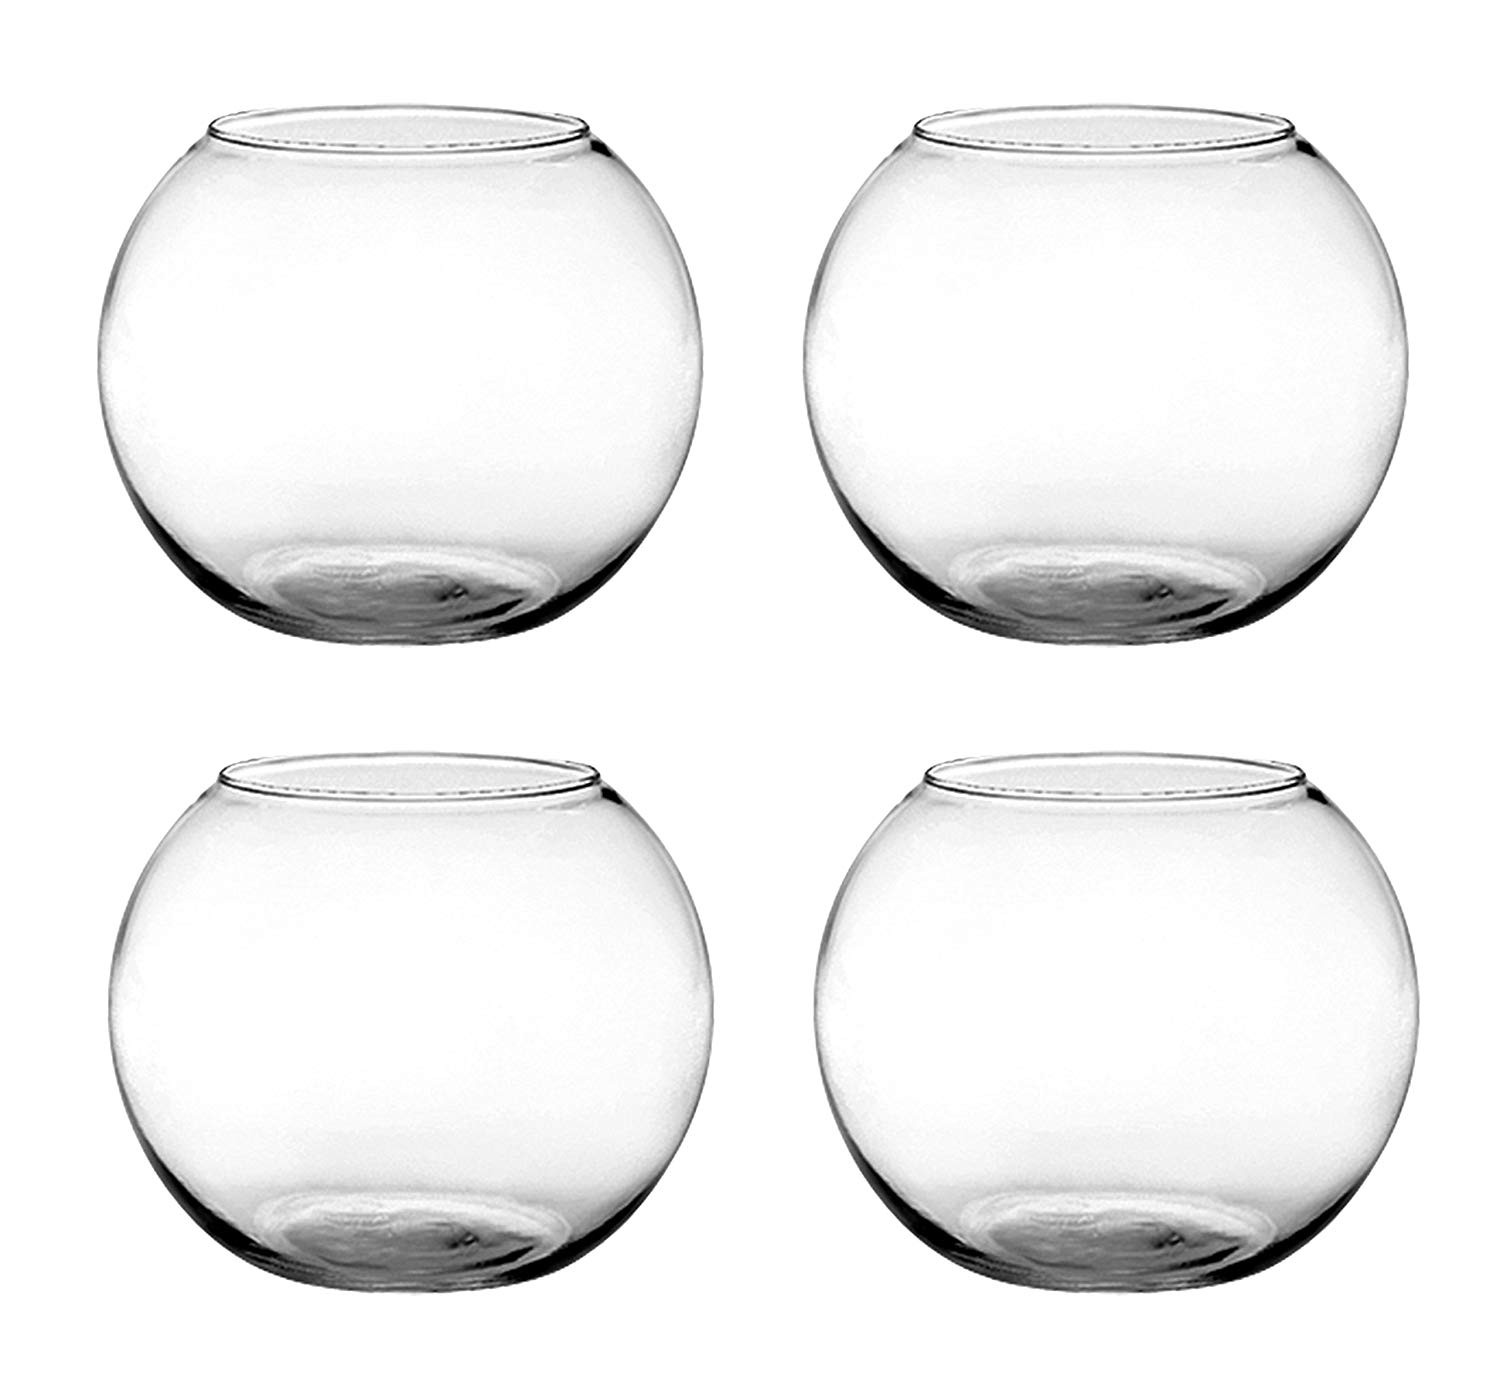 tall floor standing glass vases of amazon com set of 4 syndicate sales 6 inches clear rose bowl in amazon com set of 4 syndicate sales 6 inches clear rose bowl bundled by maven gifts garden outdoor